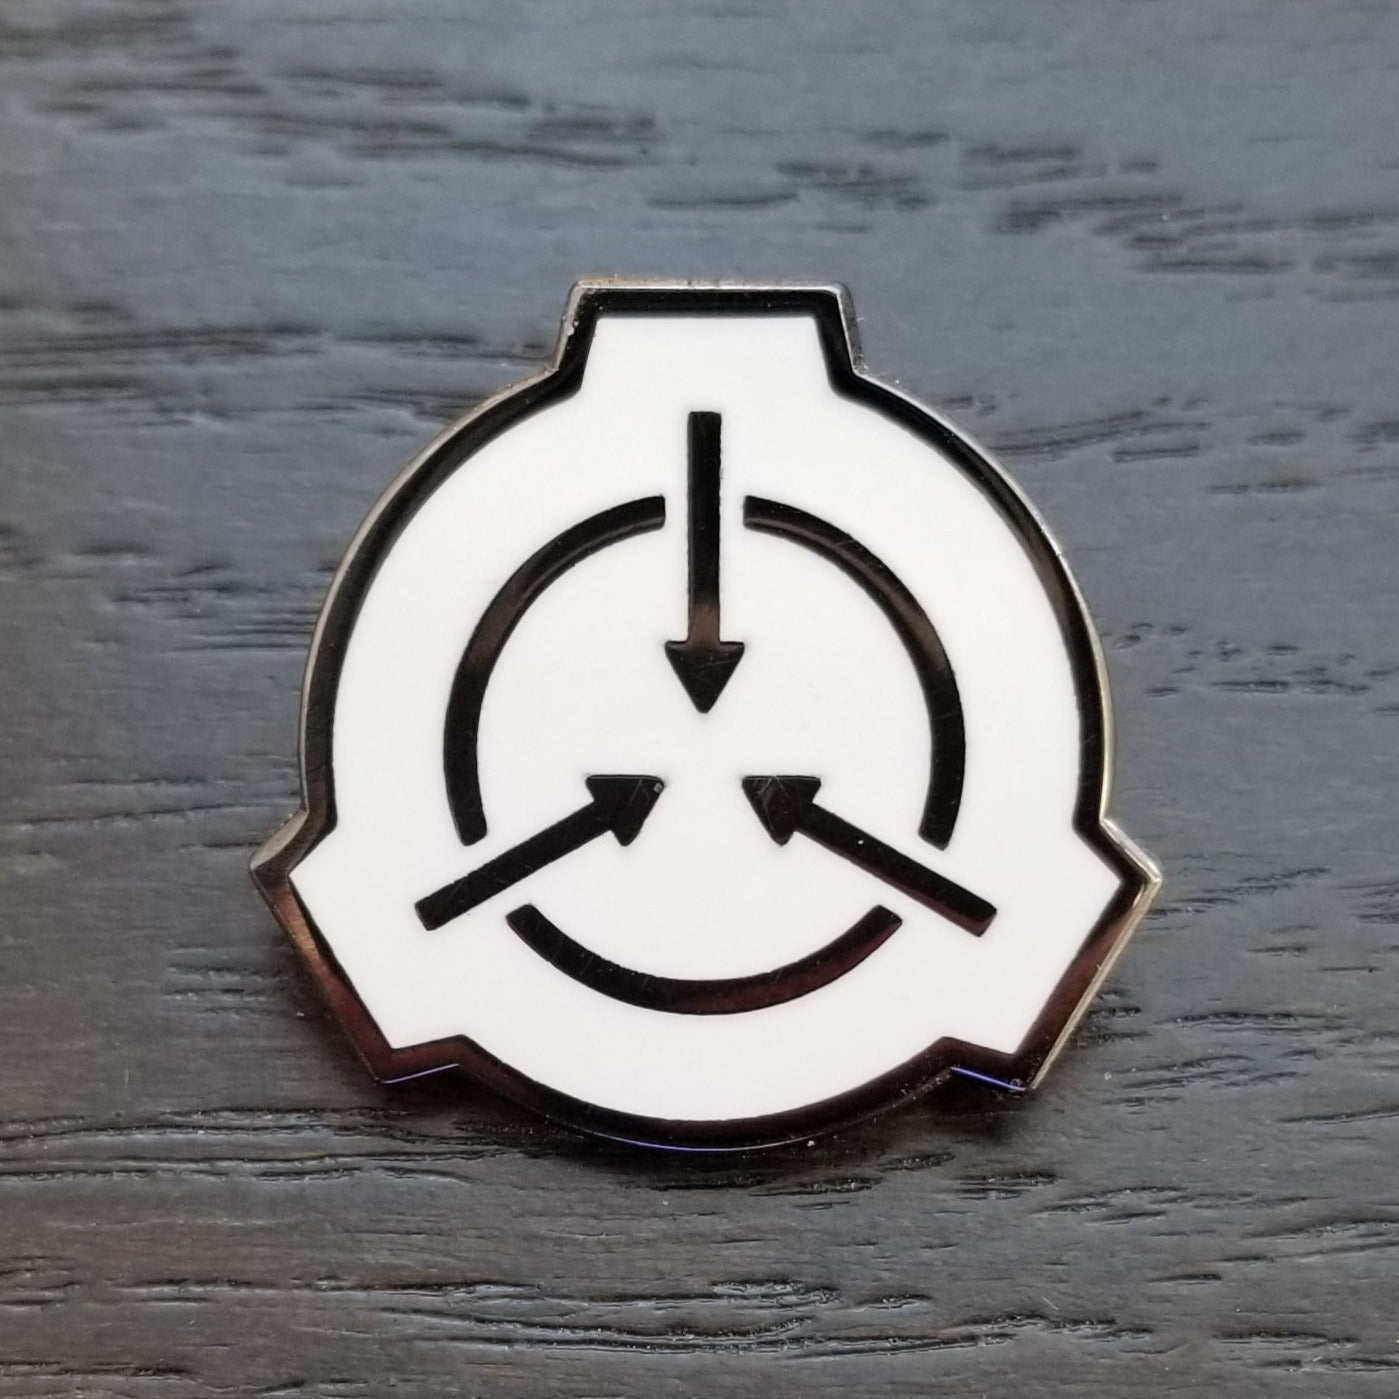 Scp Wiki Pins and Buttons for Sale